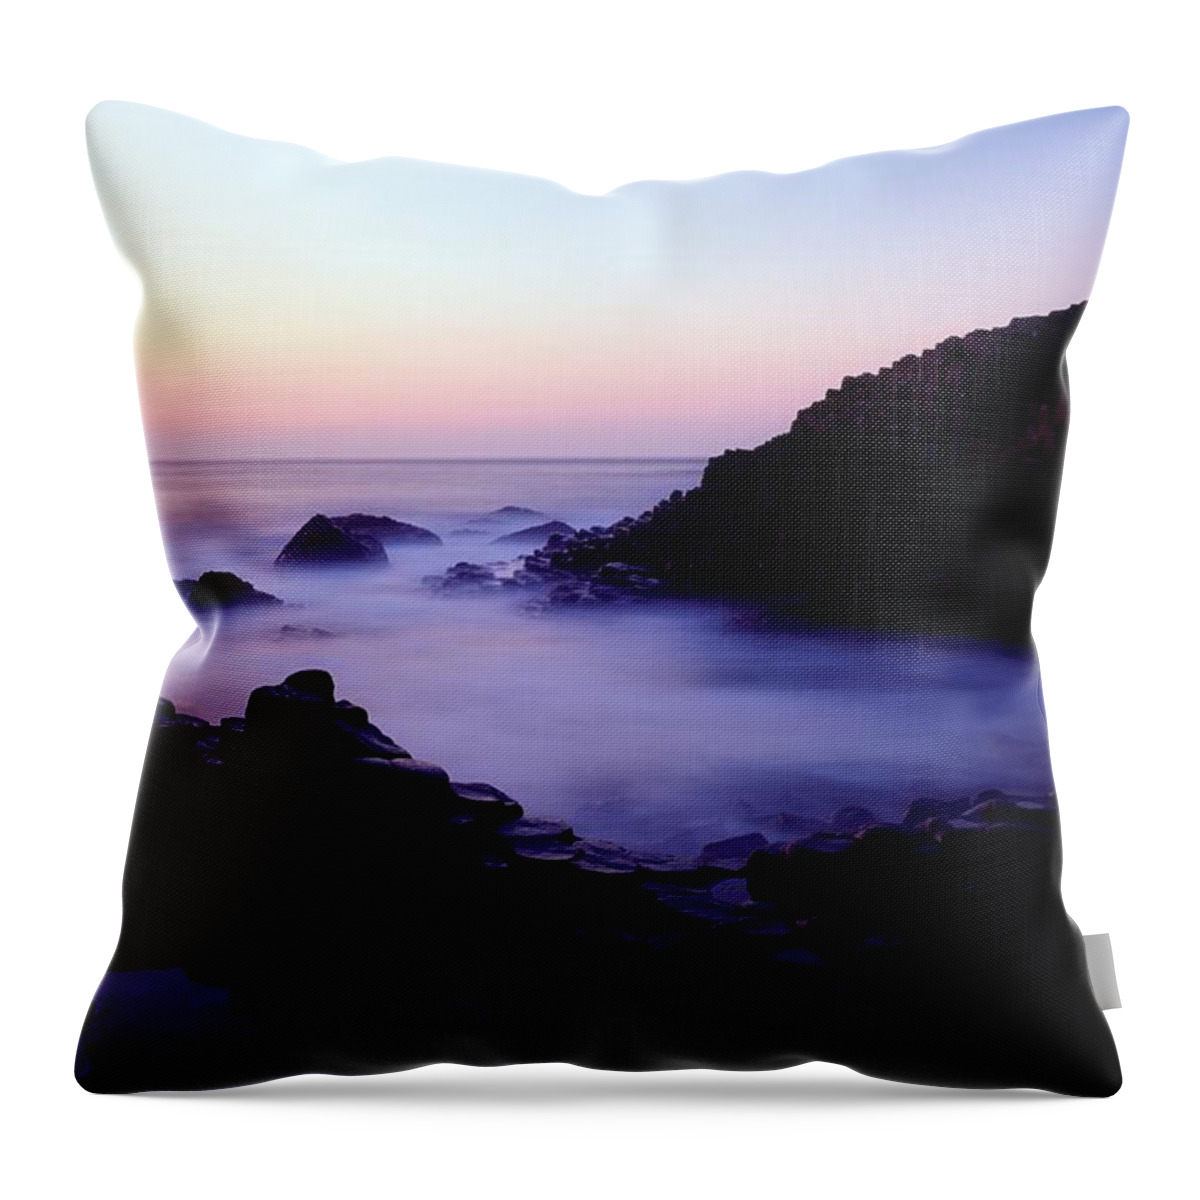 Back Lit Throw Pillow featuring the photograph The Giants Causeway, Co Antrim, Ireland by The Irish Image Collection 